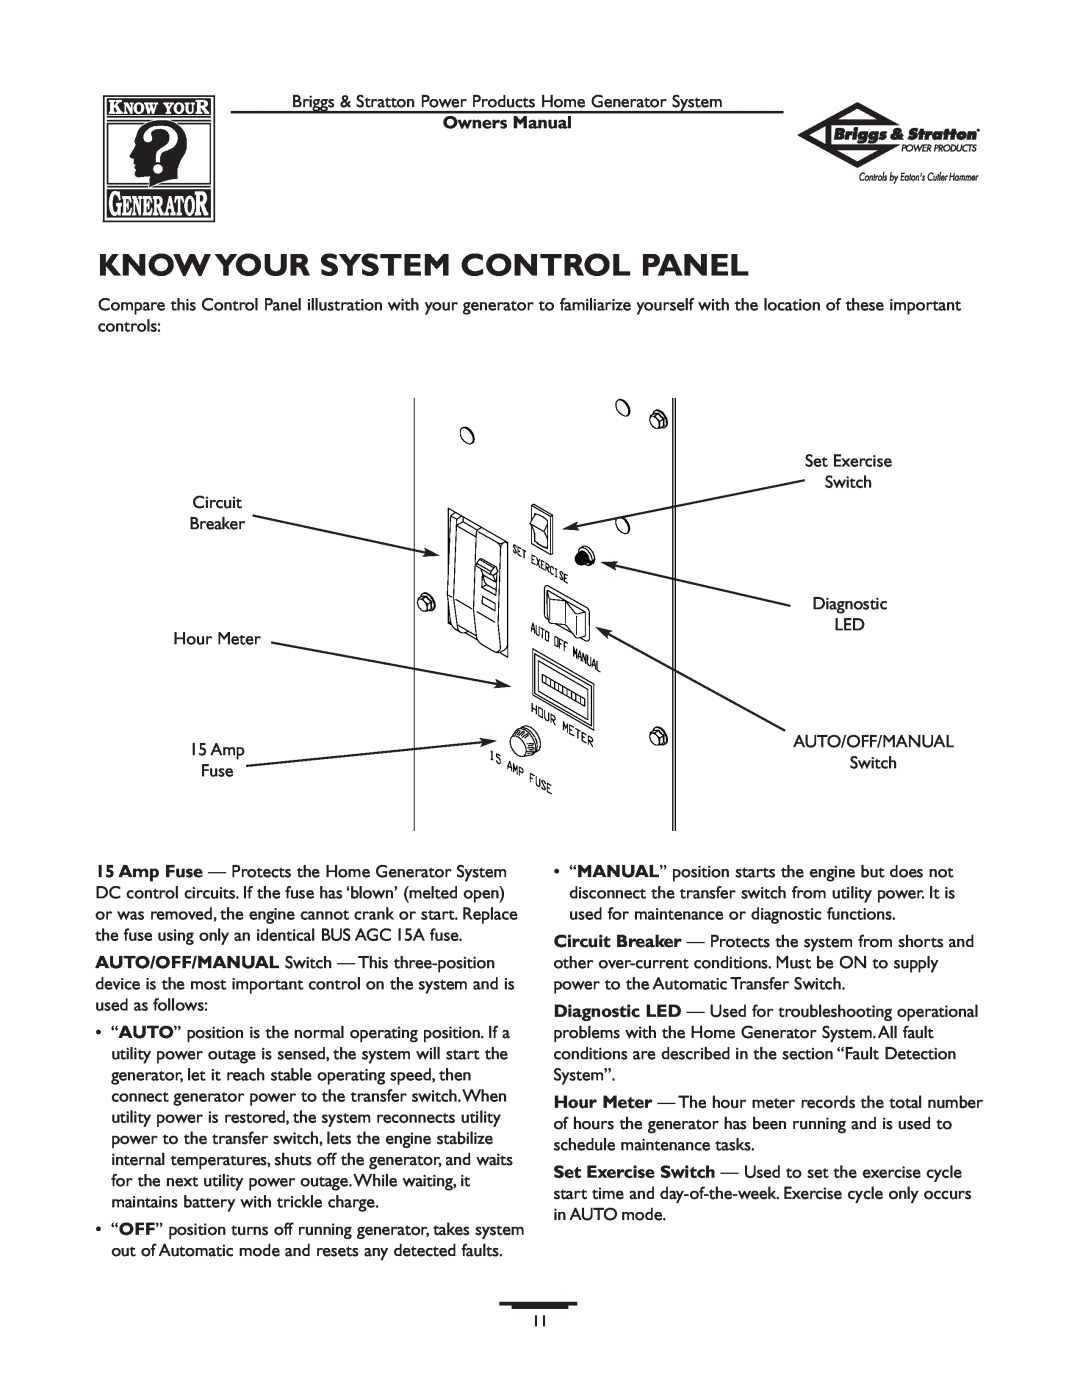 Briggs & Stratton 190839GS owner manual Know Your System Control Panel, Owners Manual, Fuse 